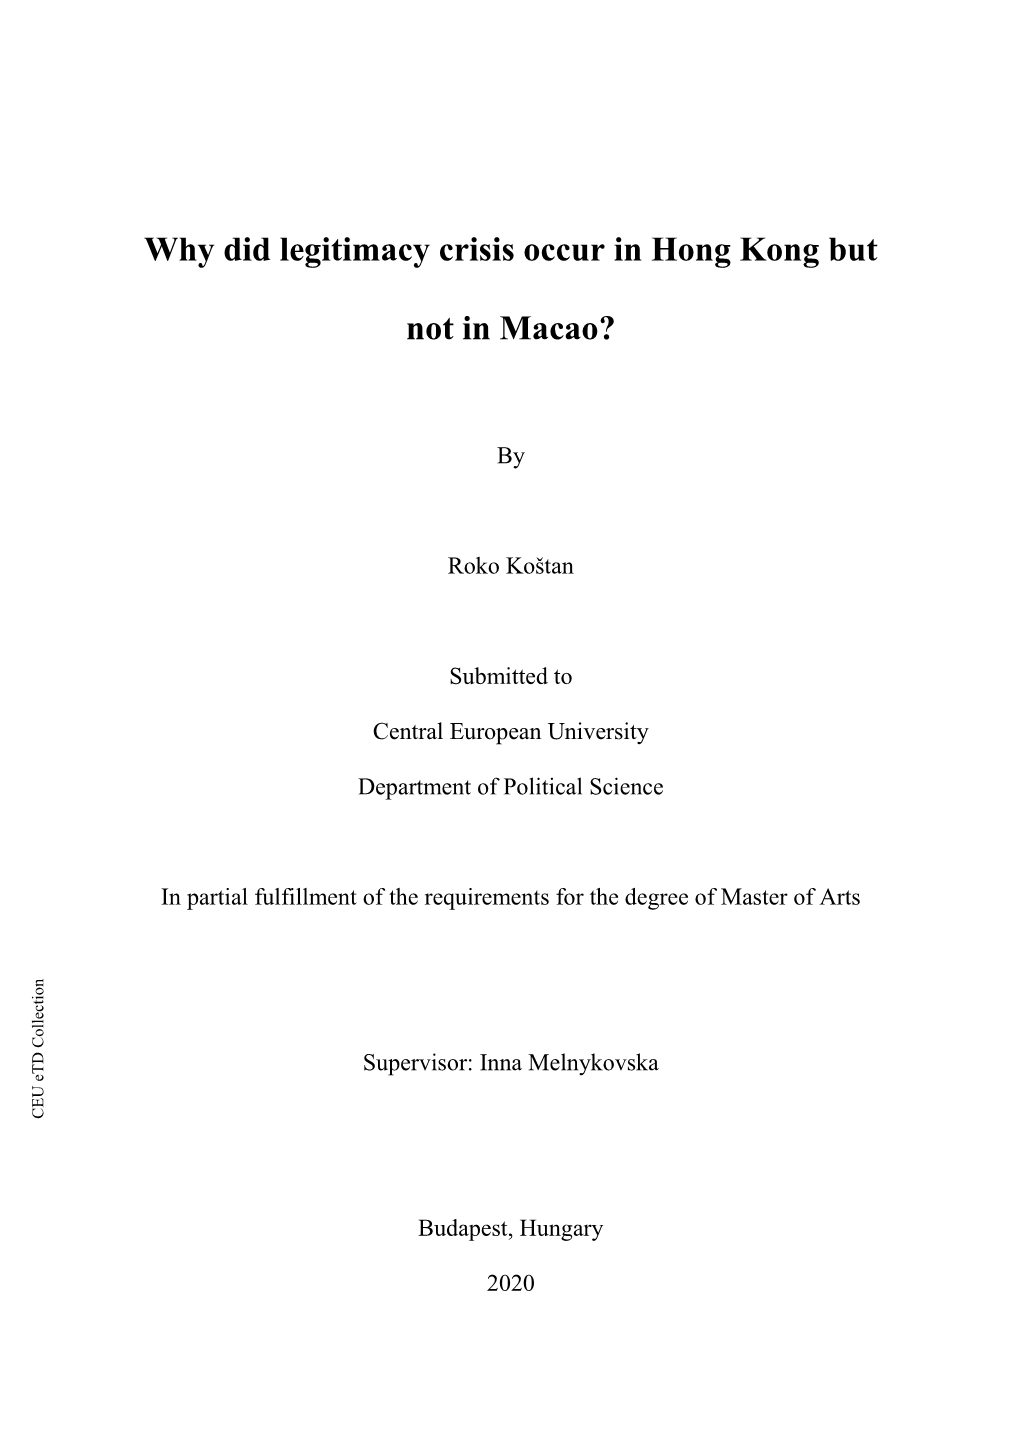 Why Did Legitimacy Crisis Occur in Hong Kong but Not in Macao?